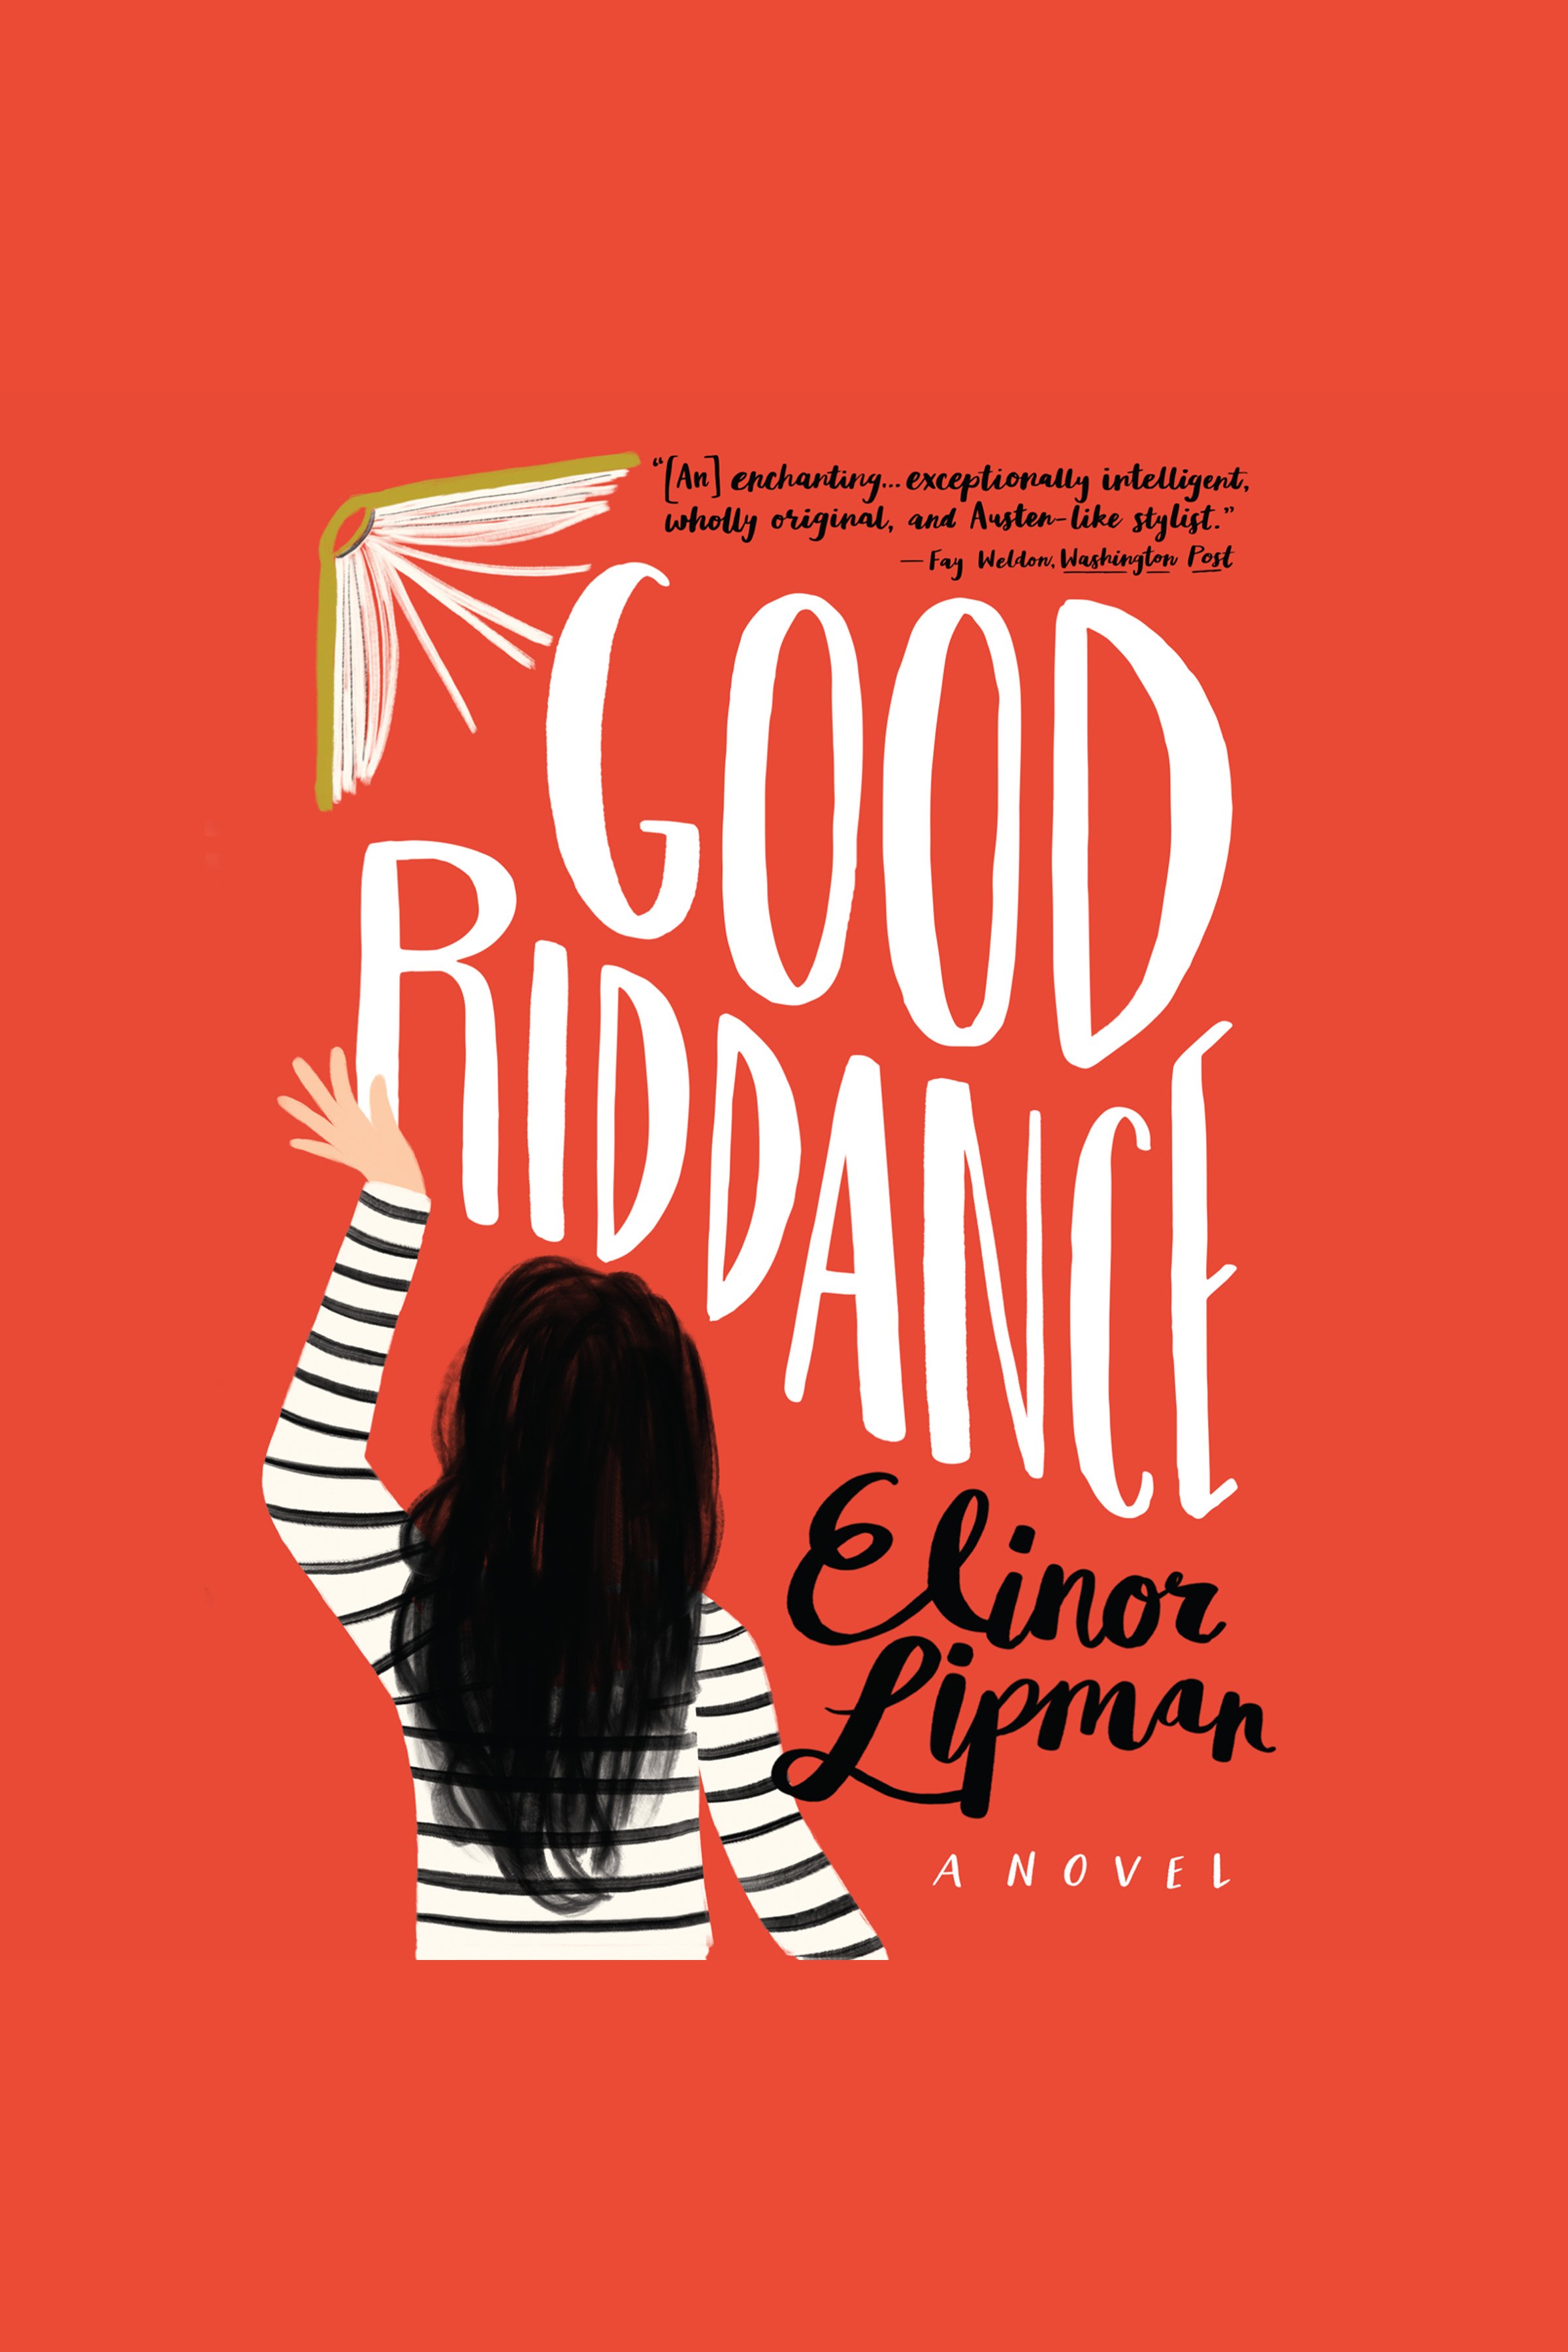 Good riddance cover image